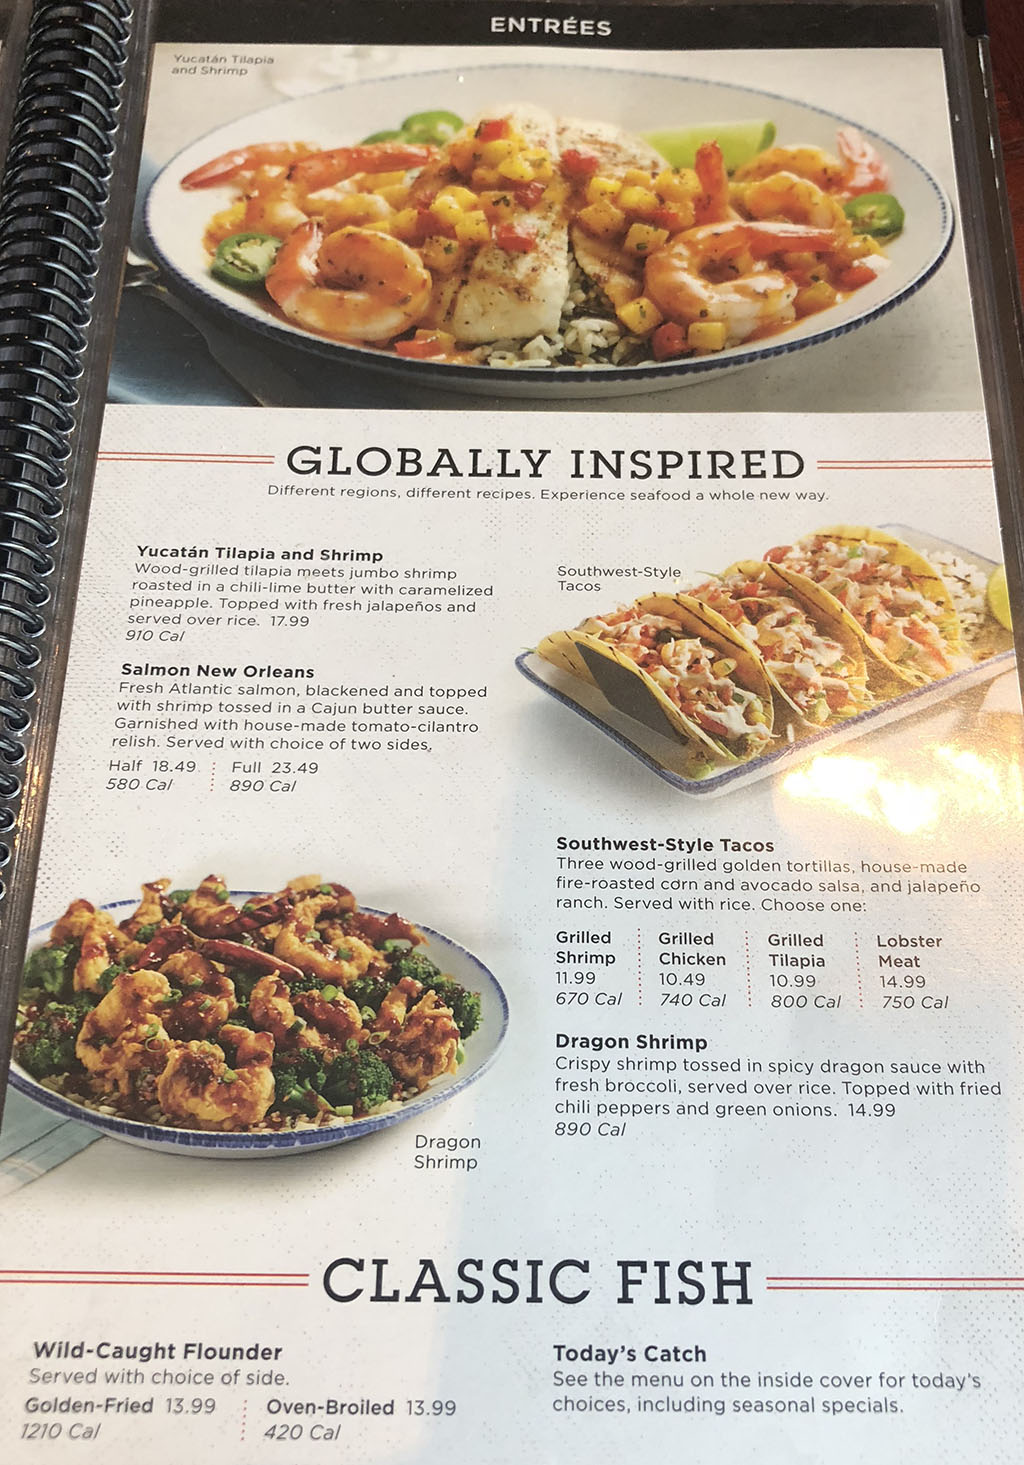 Red Lobster menu - entrees - globally inspired, classic fish